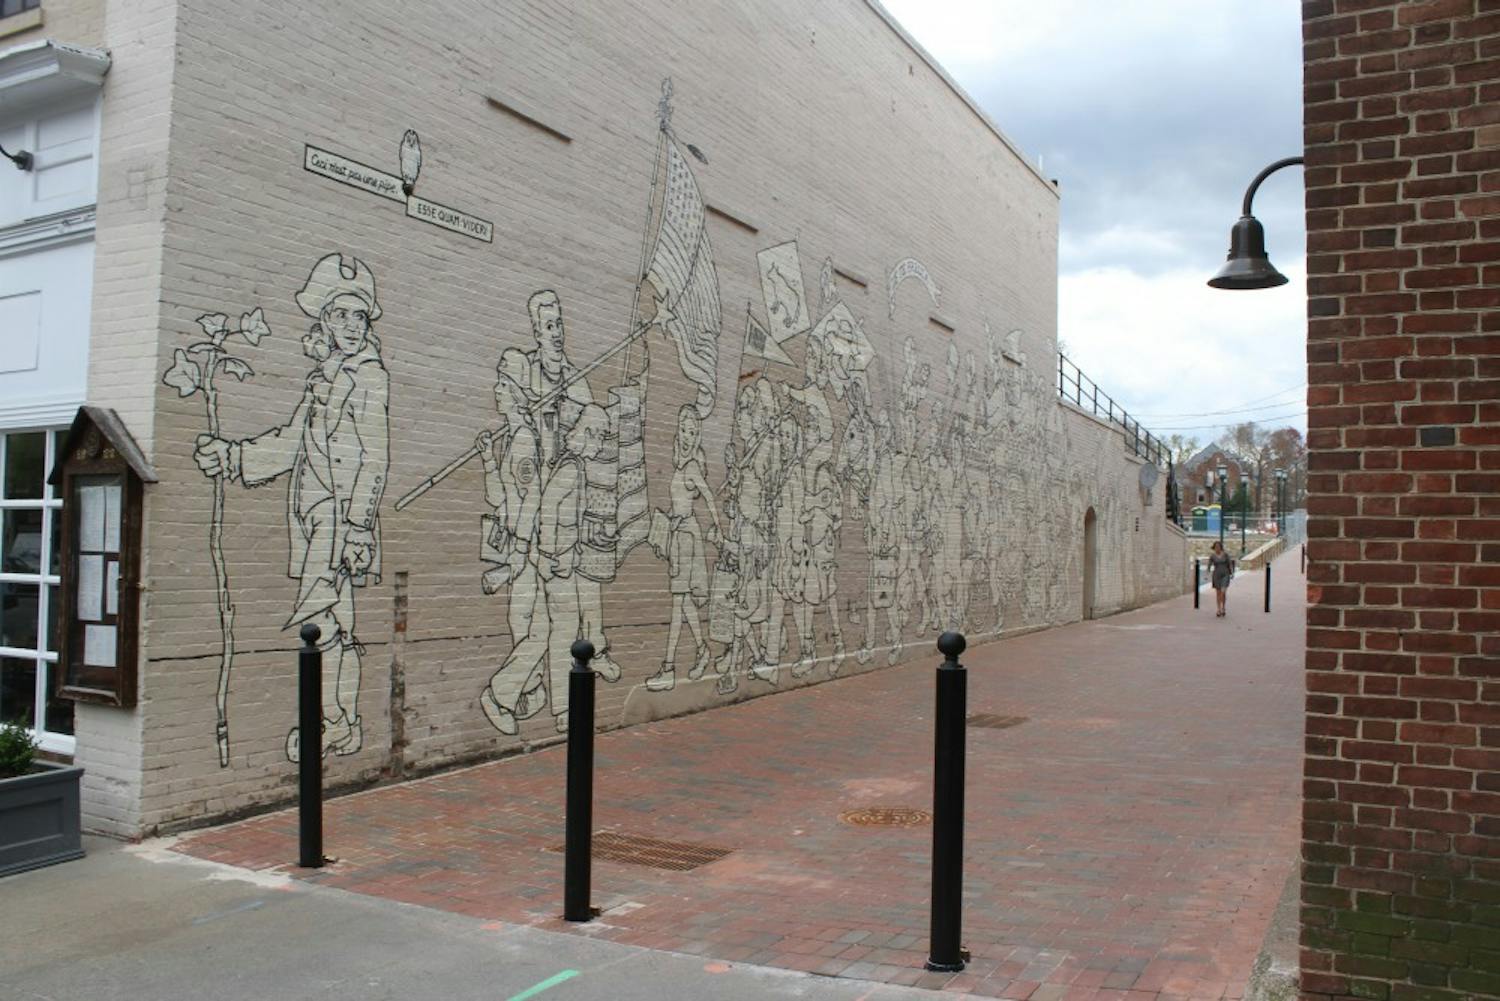 Porthole Alley contains the "Parade of Humanity" mural, painted in 1997 by Chapel Hill native Michael Brown.&nbsp;